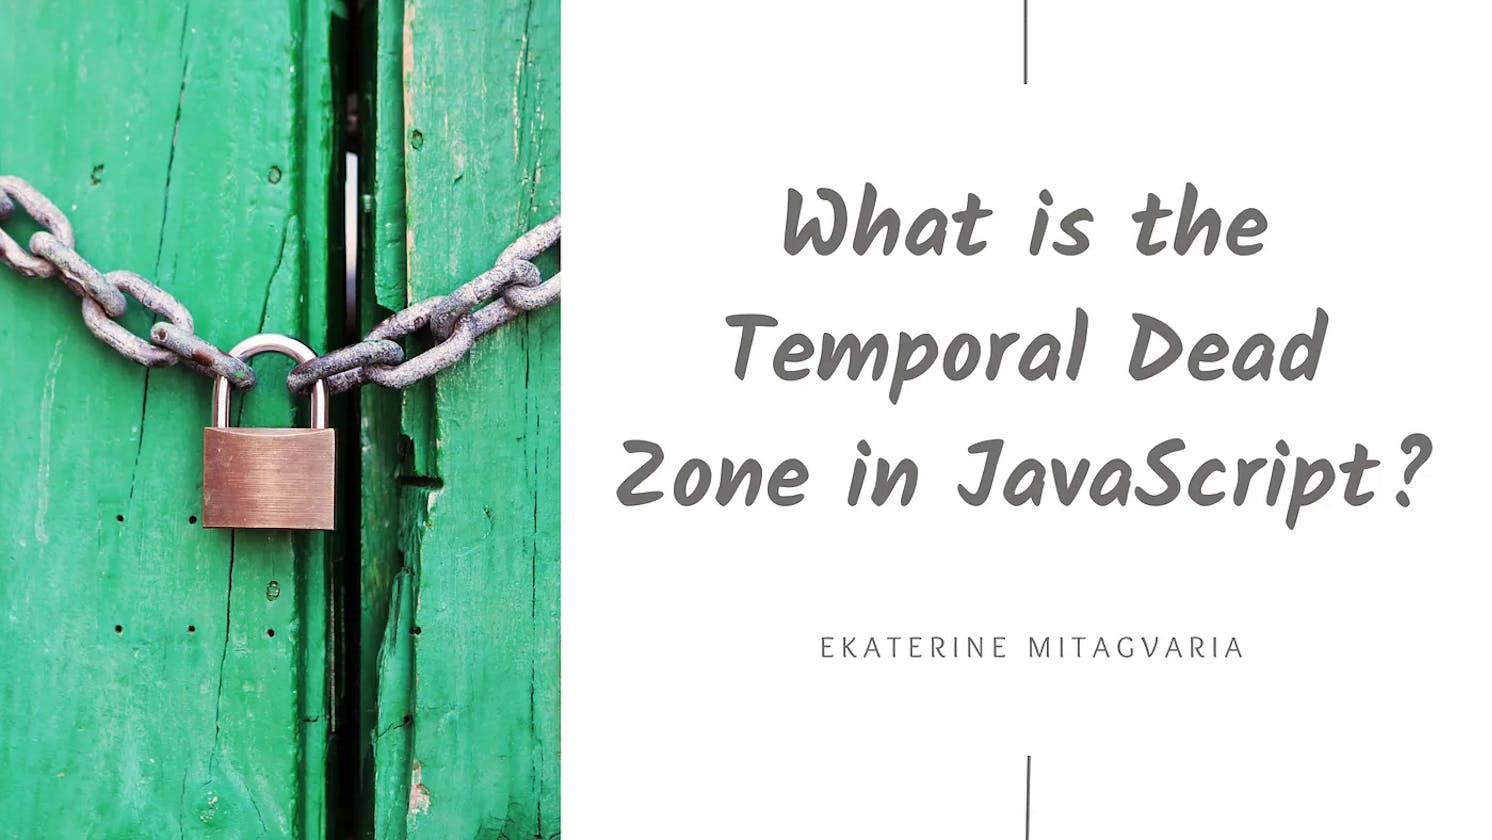 What is the Temporal Dead Zone in JavaScript?